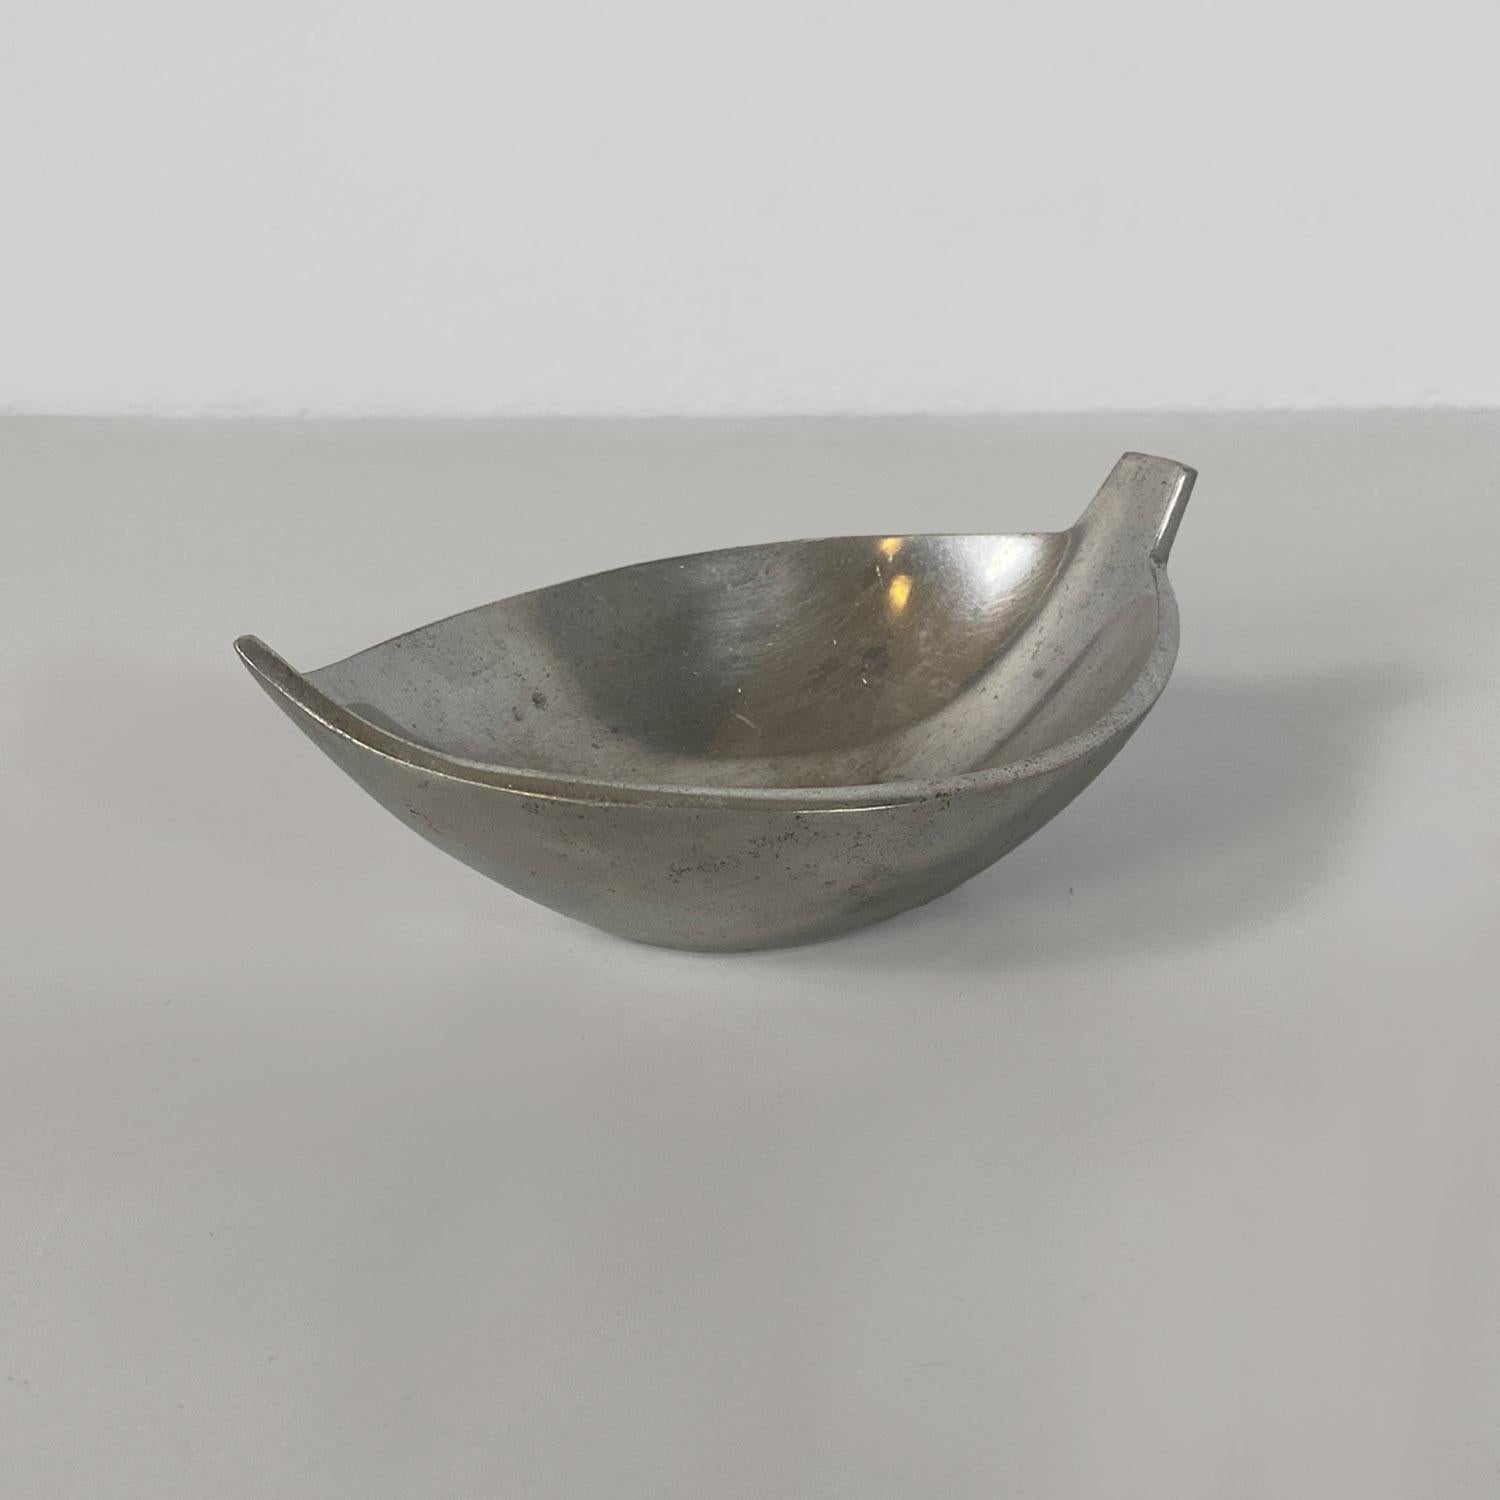 Metal Italian modern metal irregular bowl or container cup by La Rinascente, 1990s For Sale